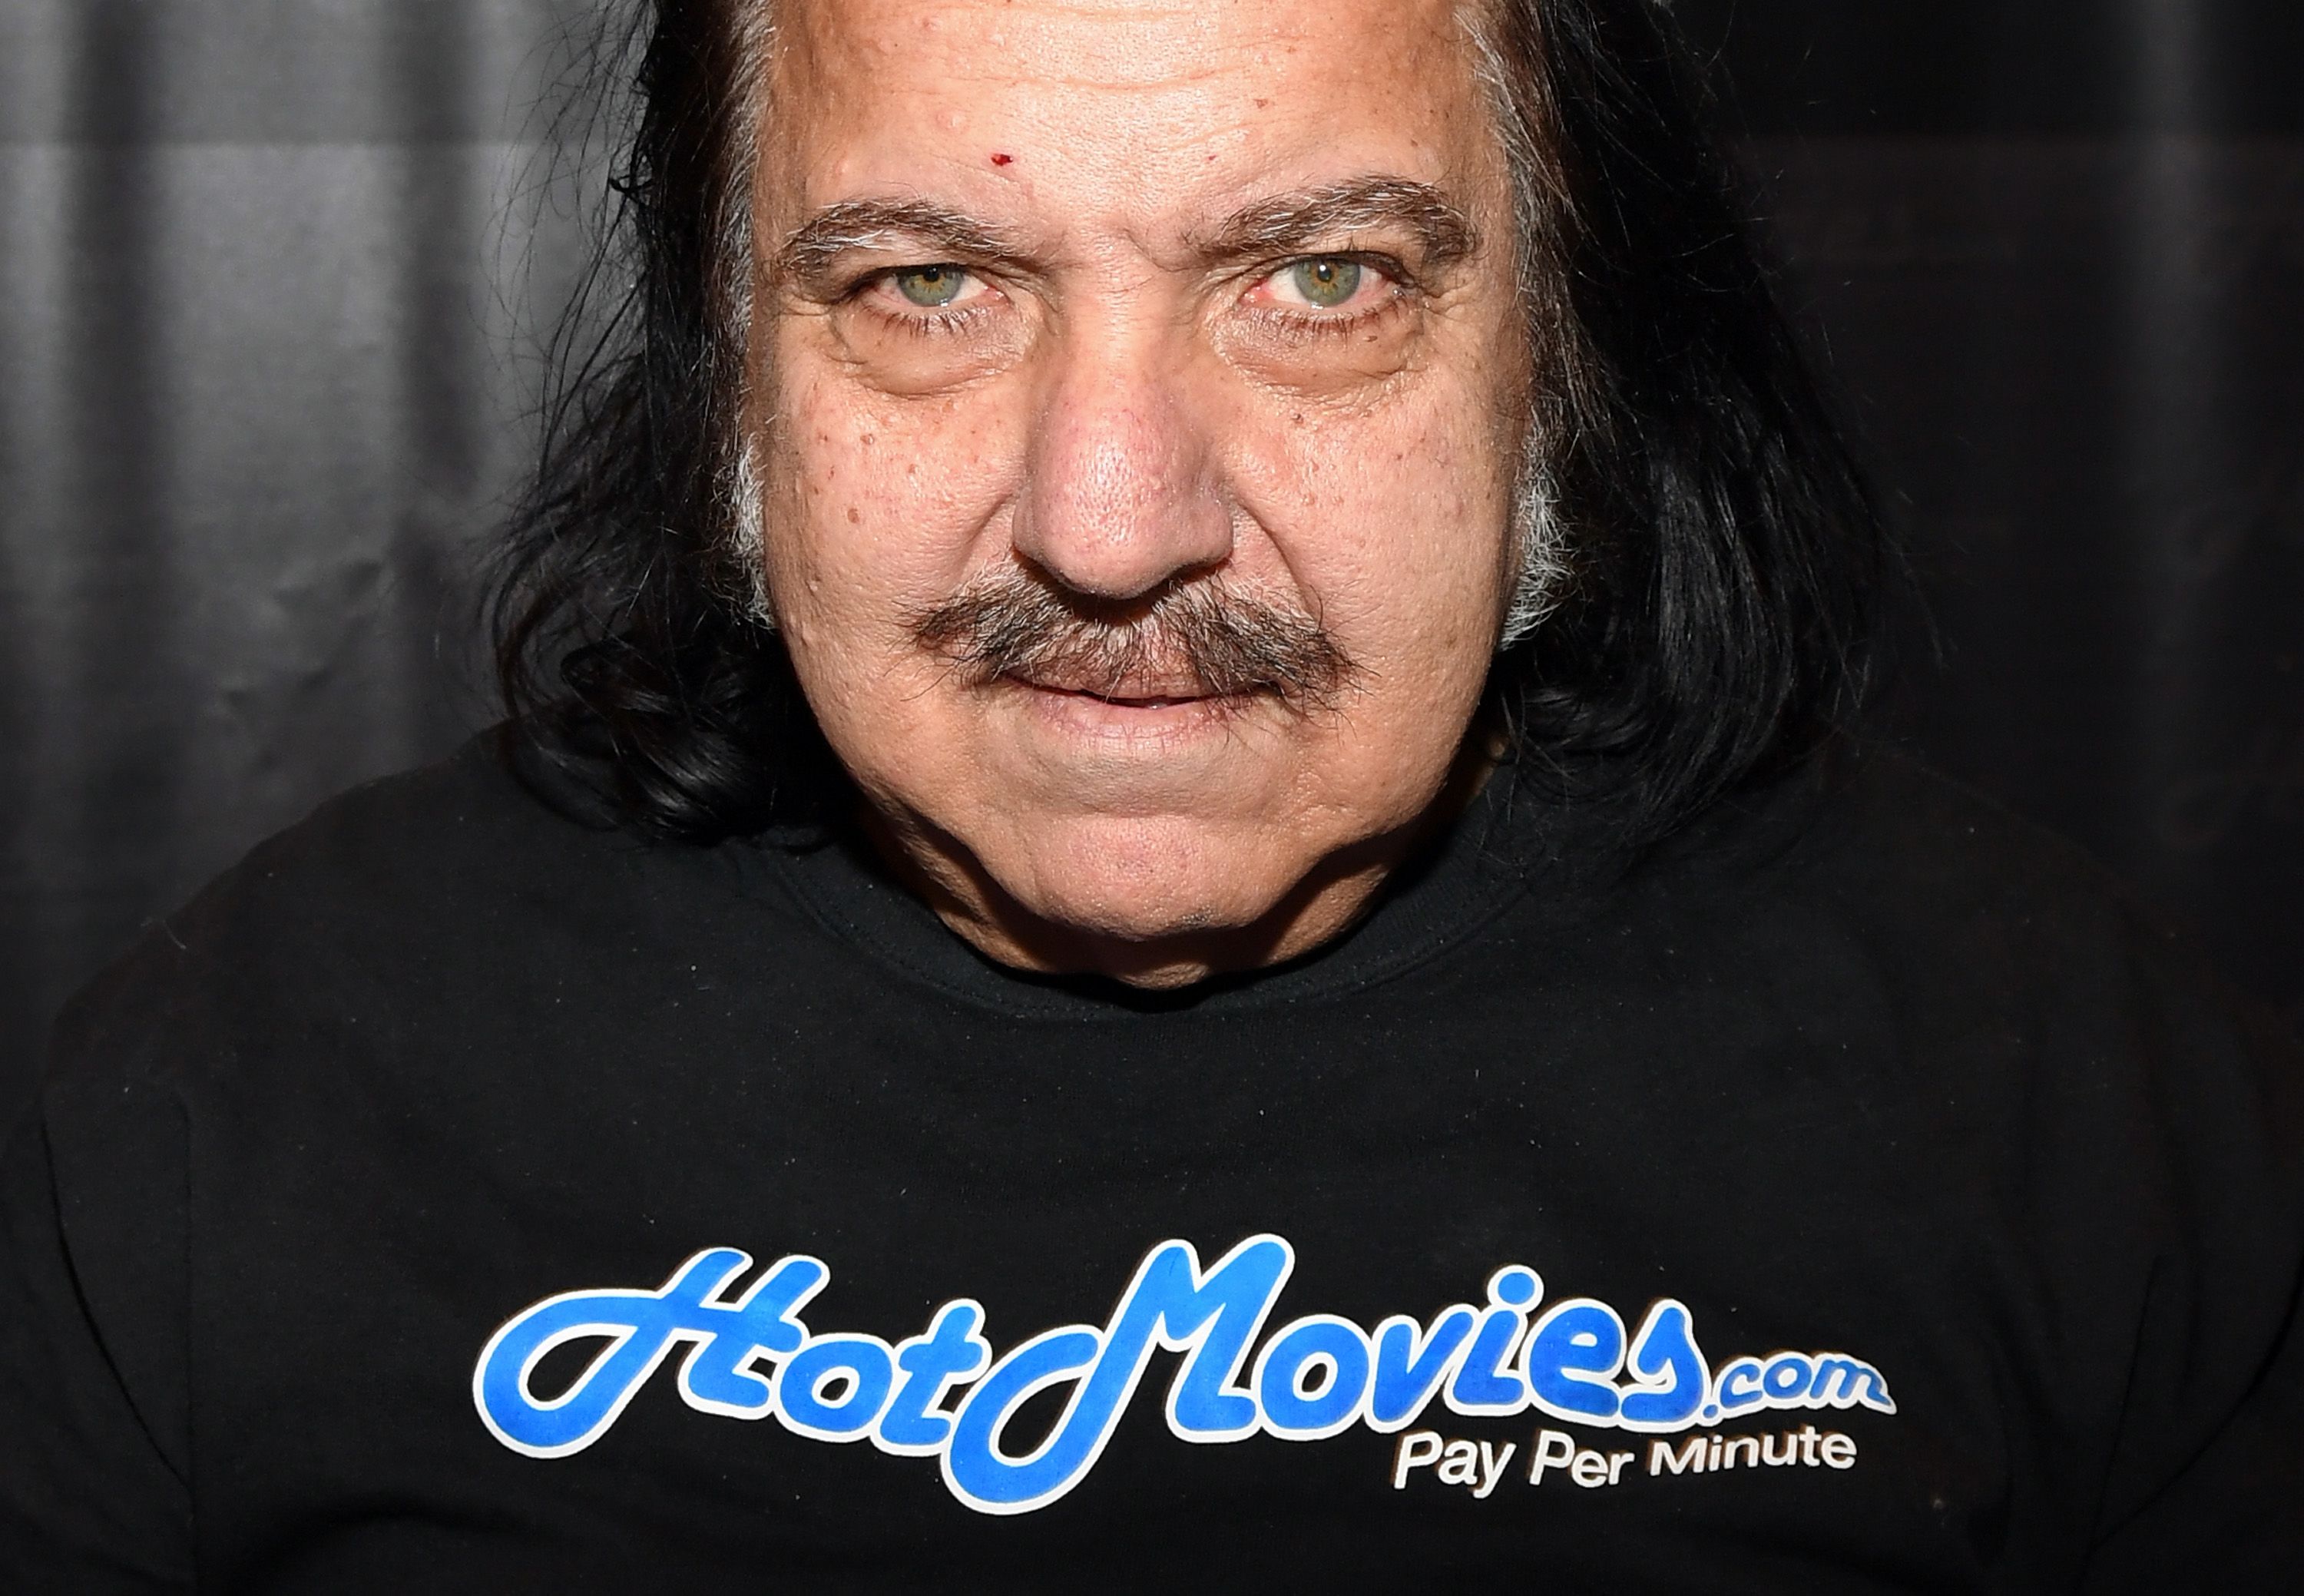 Xxx Reap Hd - Ron Jeremy, porn star, charged with sexually assaulting four women | CNN